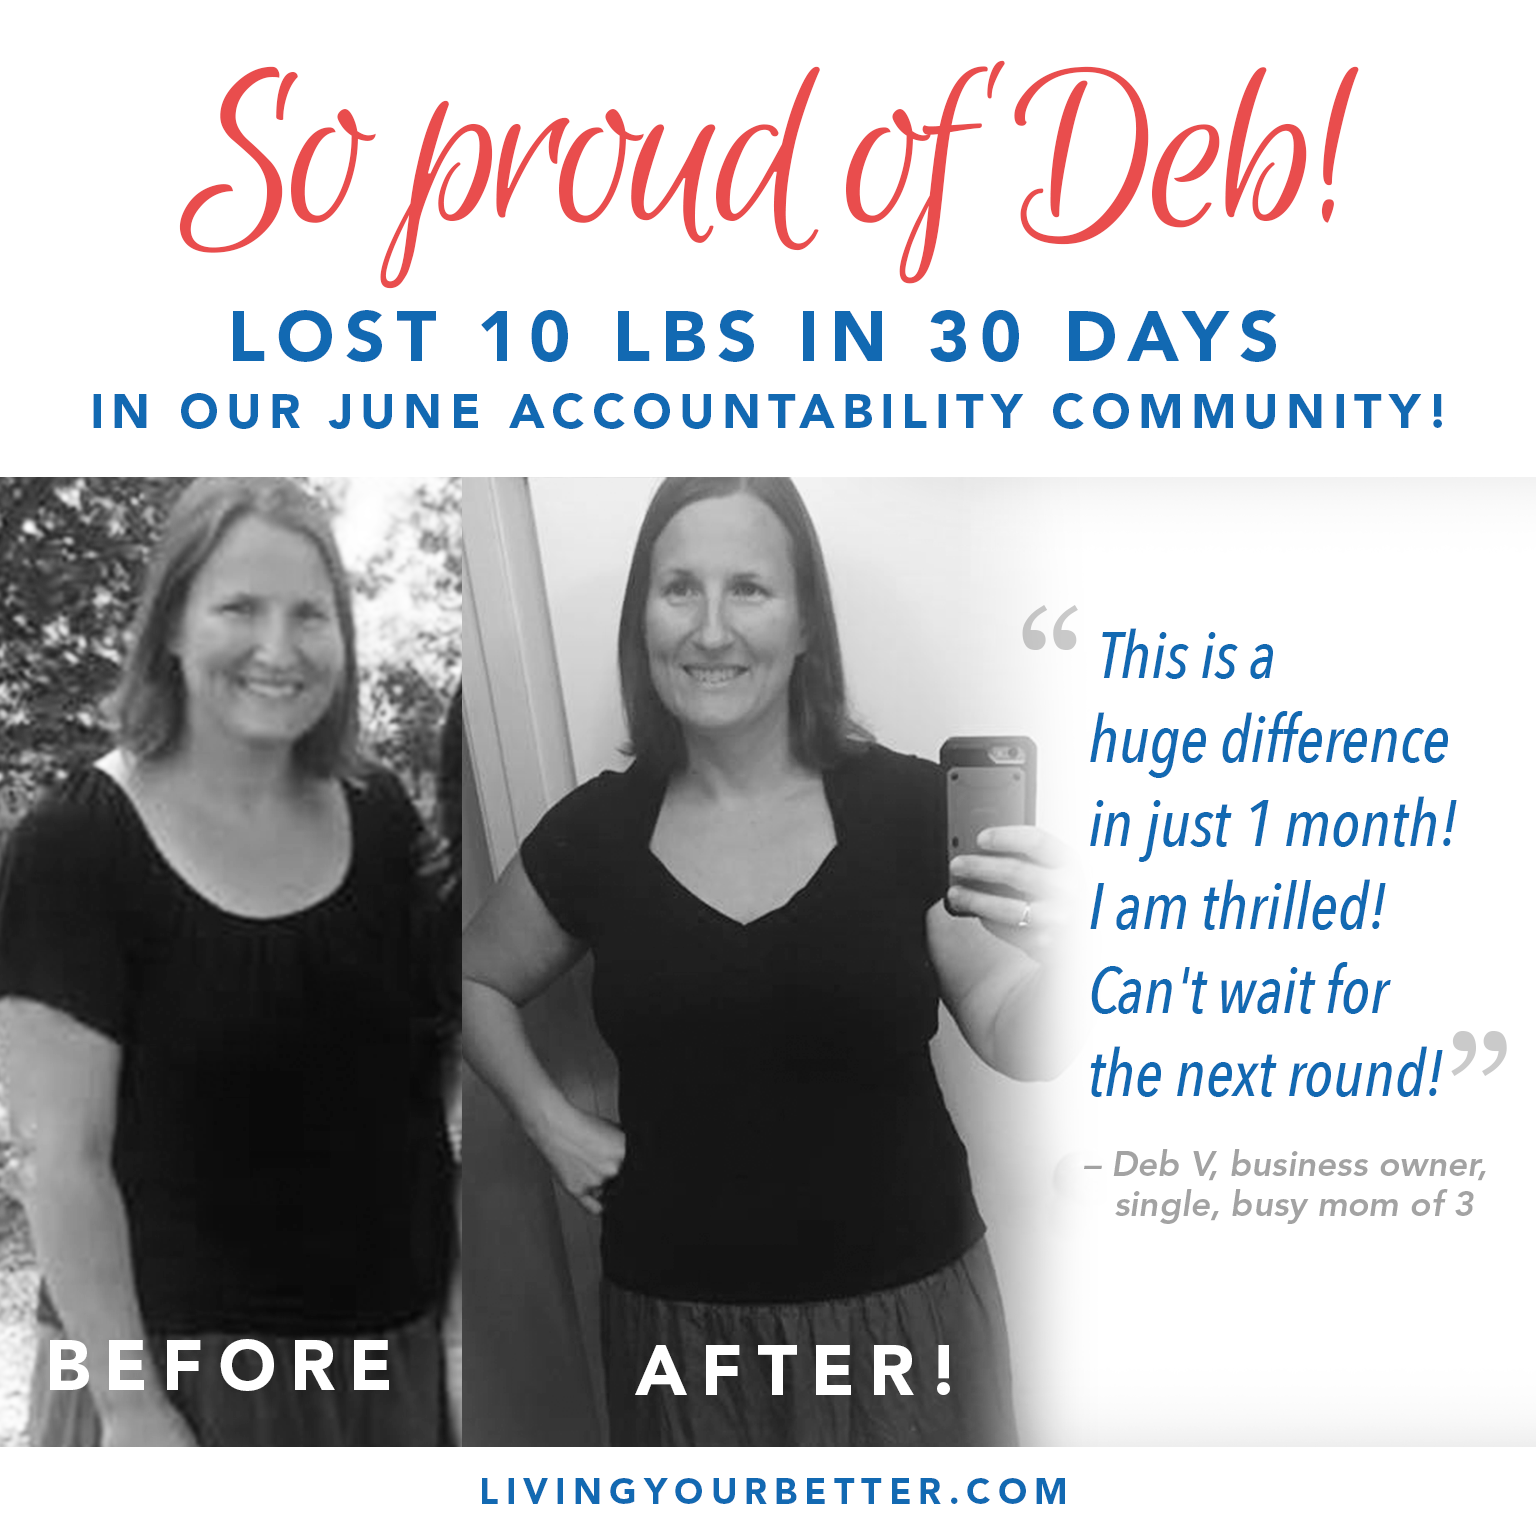 She lost 10 lbs in 30 days!